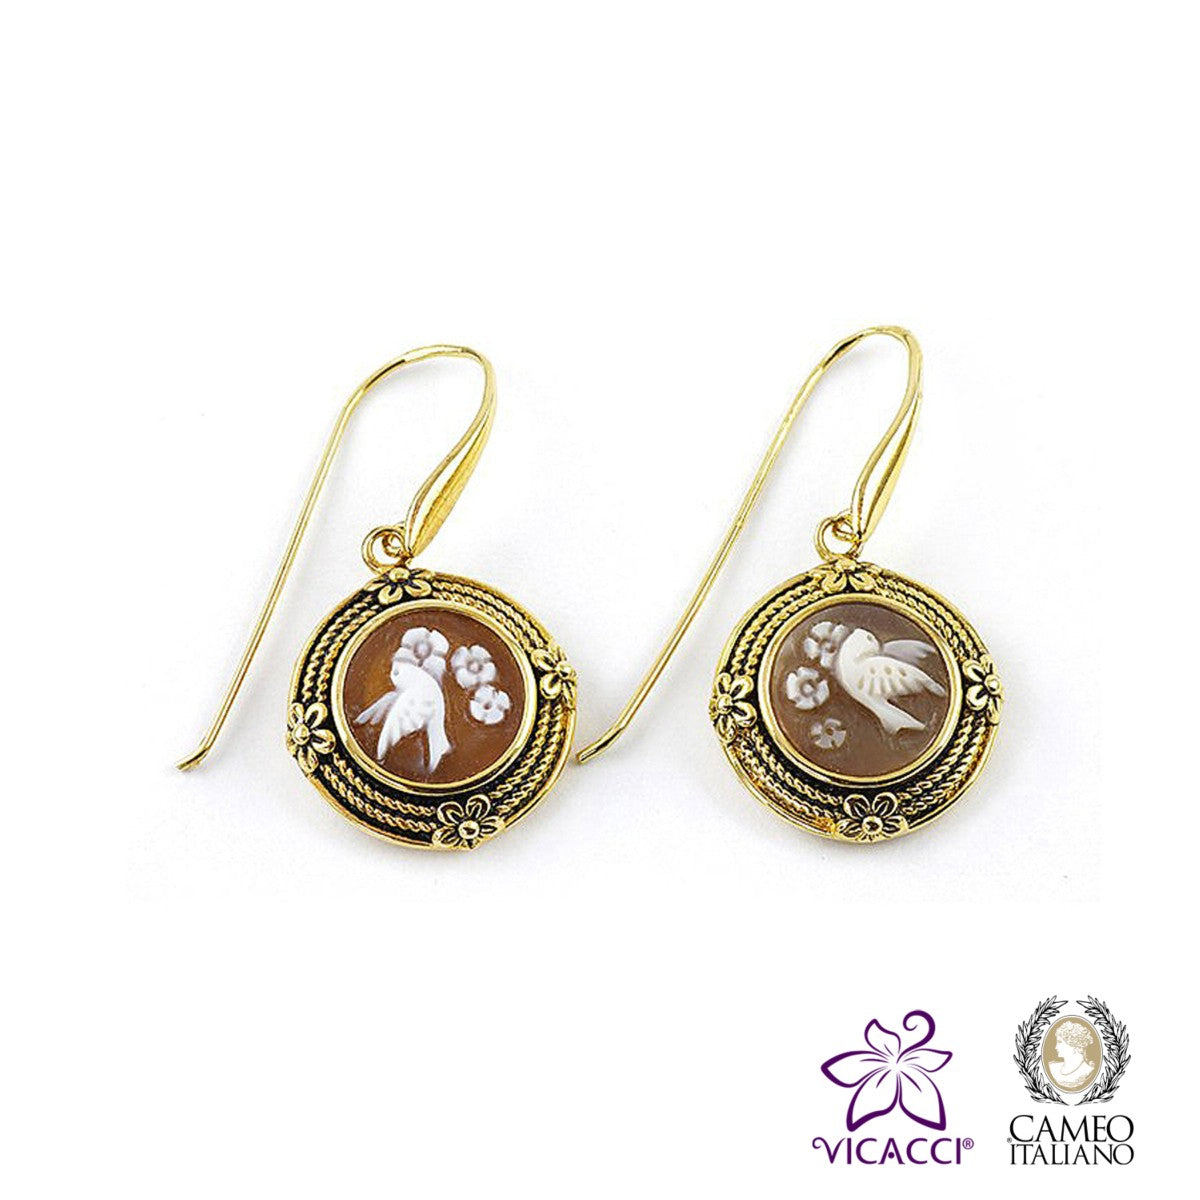 Cameo Italiano, O48 Earrings, Gold Plated Sterling Silver